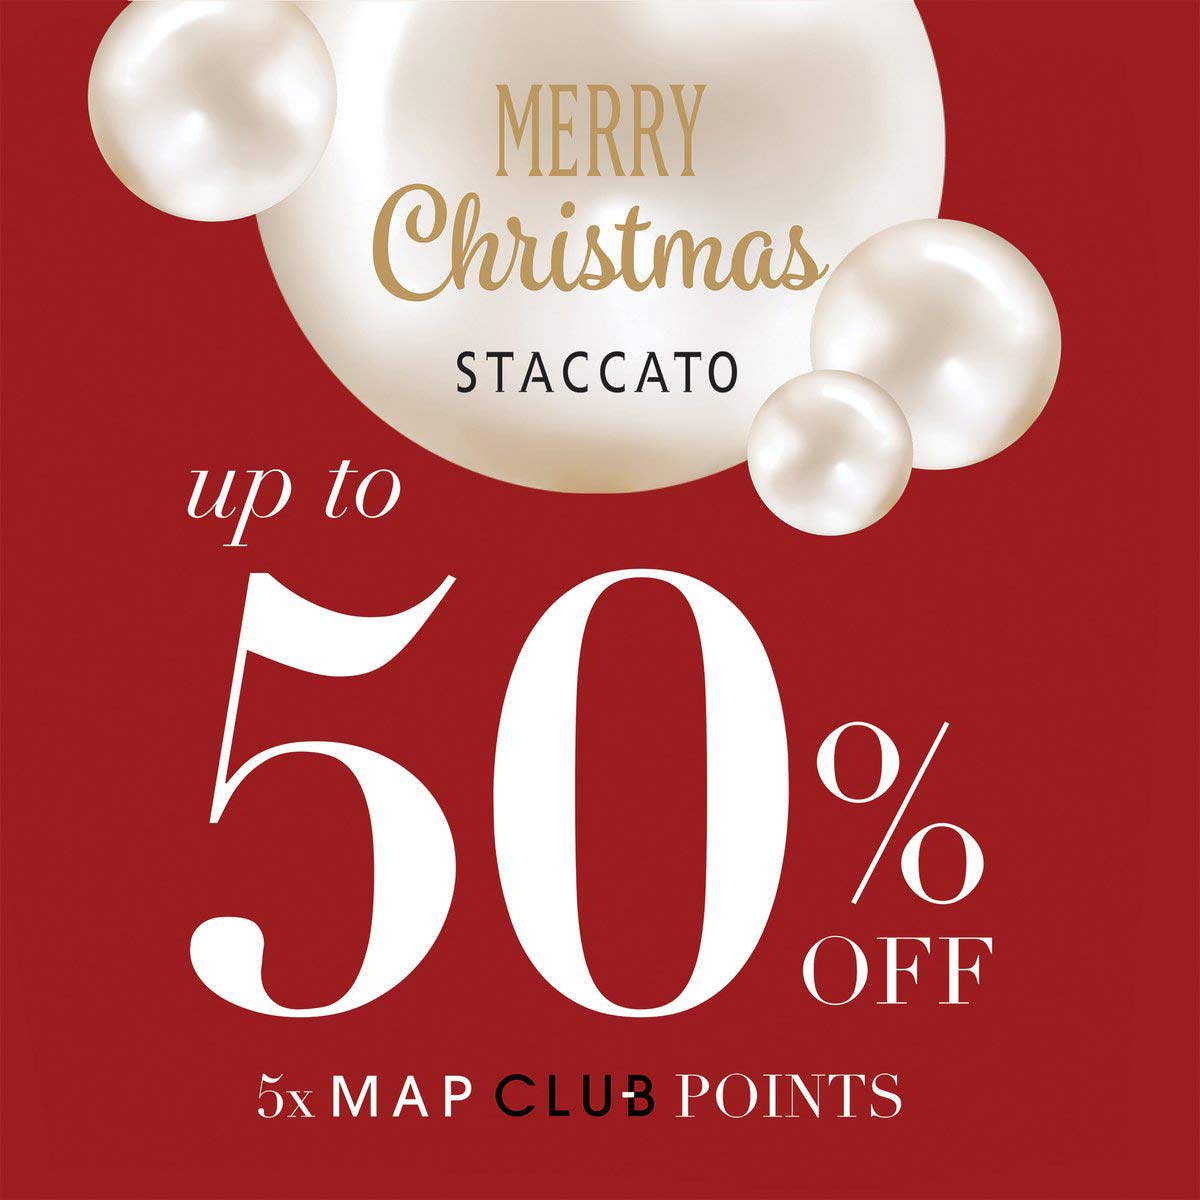  Discount Up to 50% from Staccato December 2017